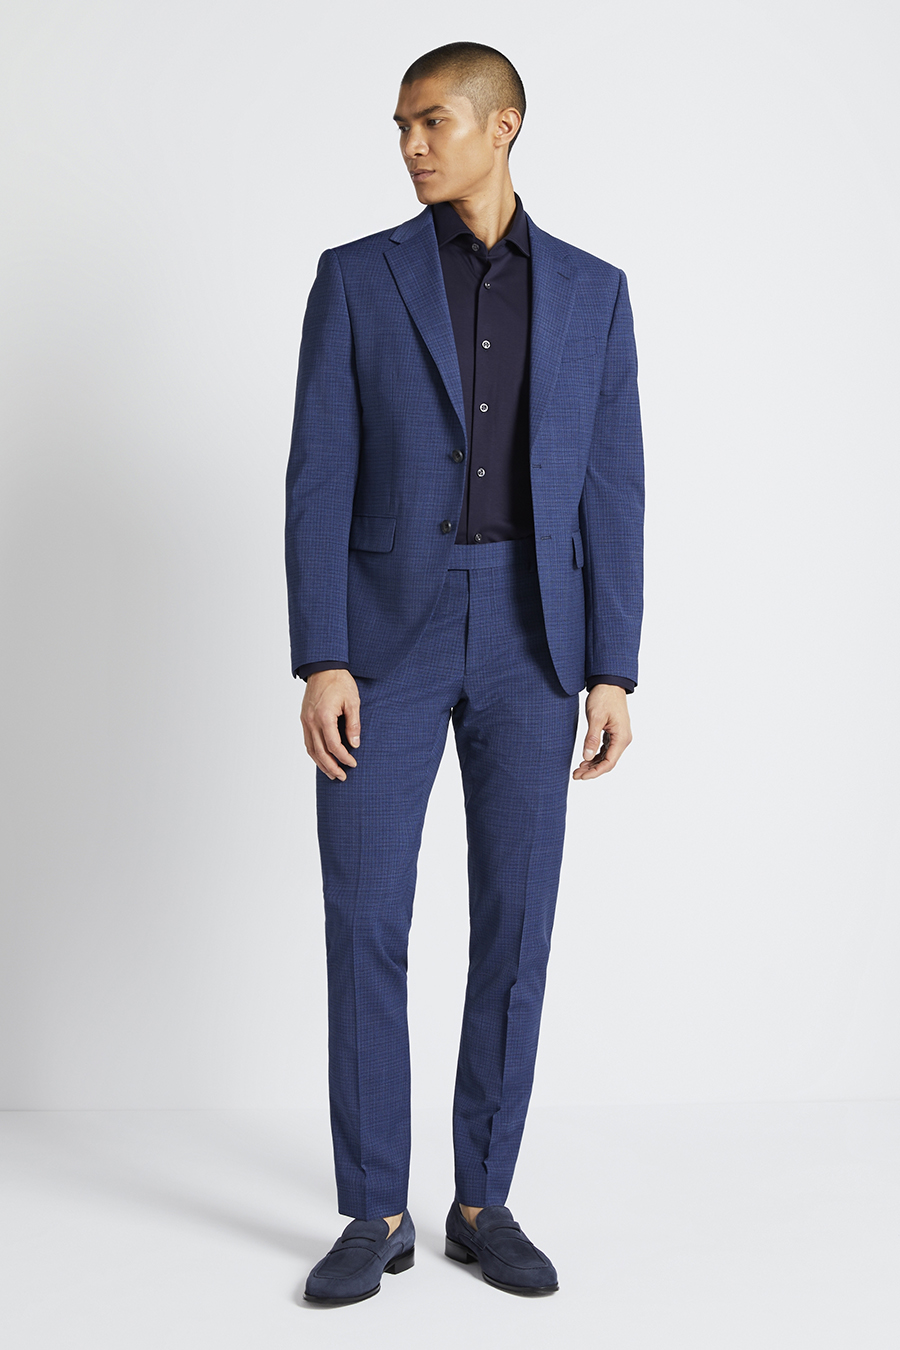 Master The Blue Suit: Color Combinations With Shirt & Tie